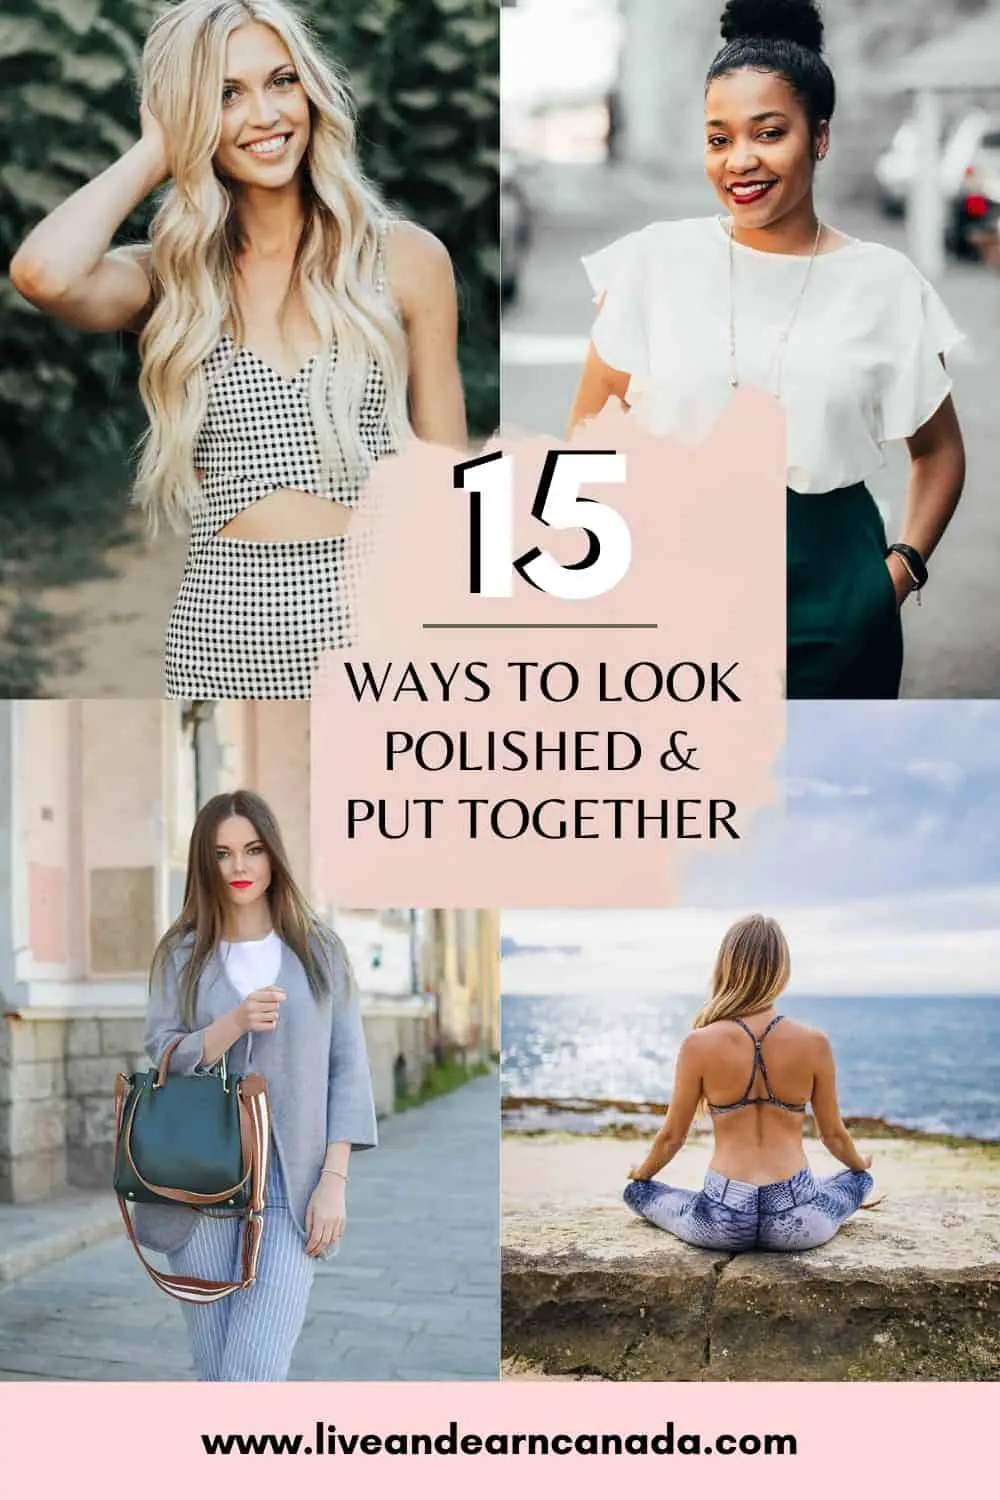 Tips on ways to look put together, we have a great list. Get our classy tips on how to look polished and put together at all times. Not sure what to wear? Here is a list of things polished women do to look perfect at all times #lookpolished #whattowear